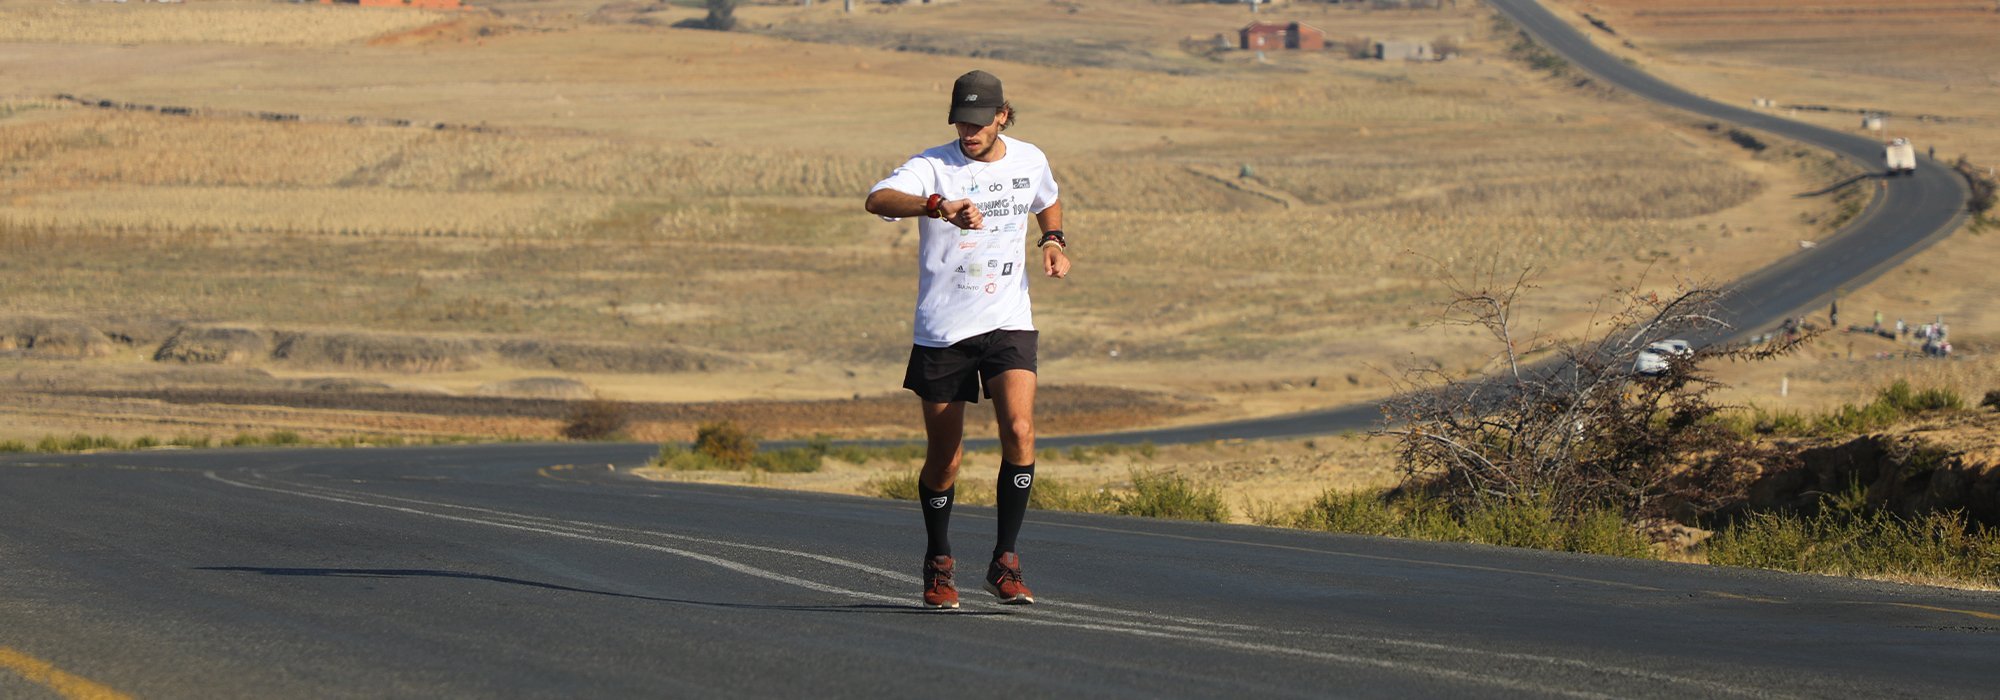 MEET NICK BUTTER, THE FIRST MAN TO RUN A MARATHON IN EVERY COUNTRY IN THE WORLD